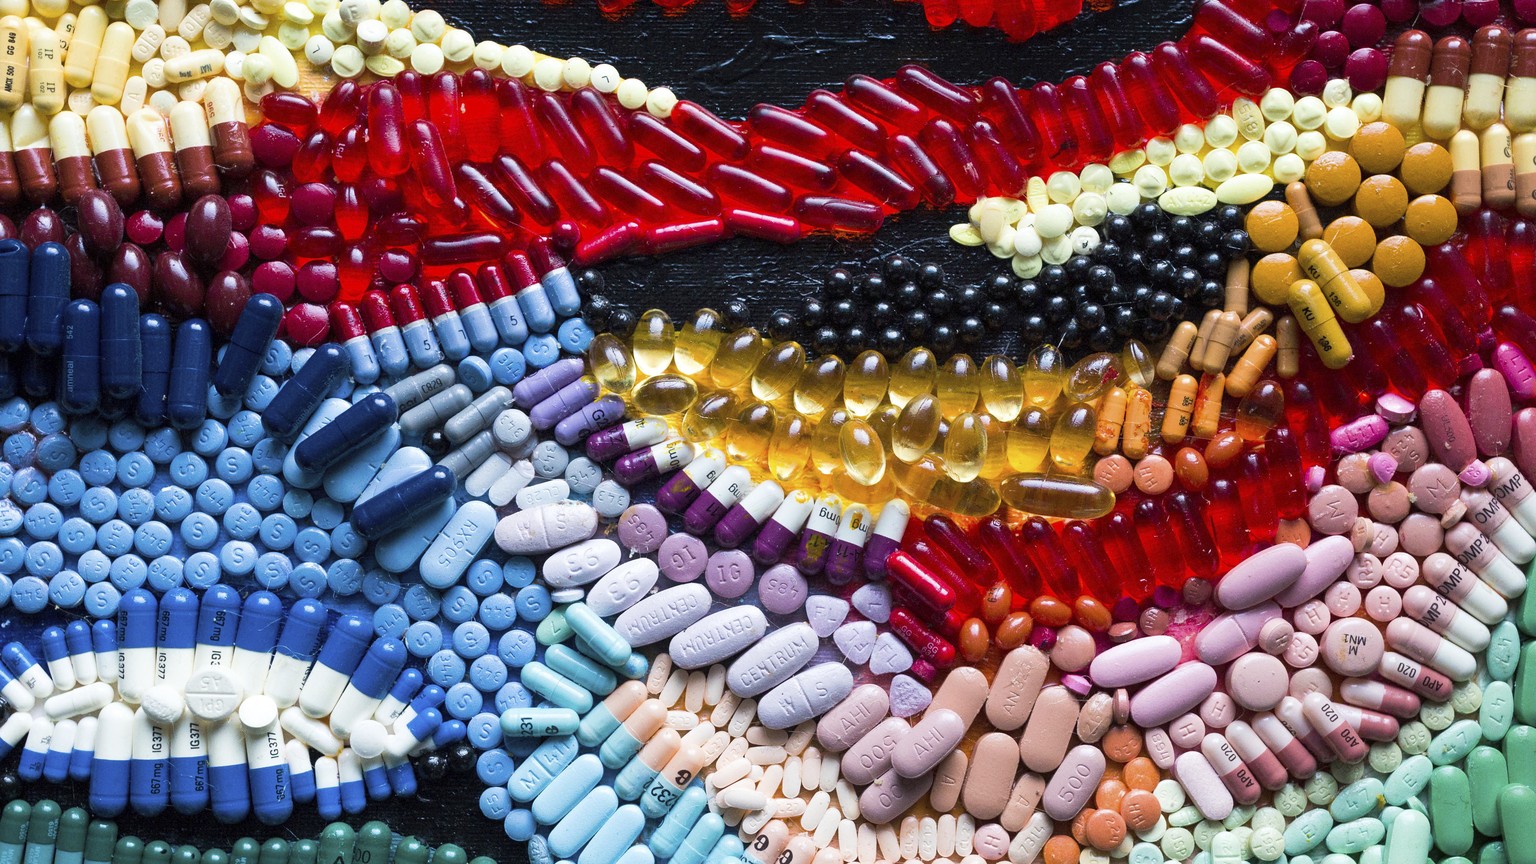 This photo provided by Dr. Elana Shpall in February 2020 shows her artwork made from prescription medication tablets, capsules and pills. About 91% of people over 65 take at least one prescription med ...